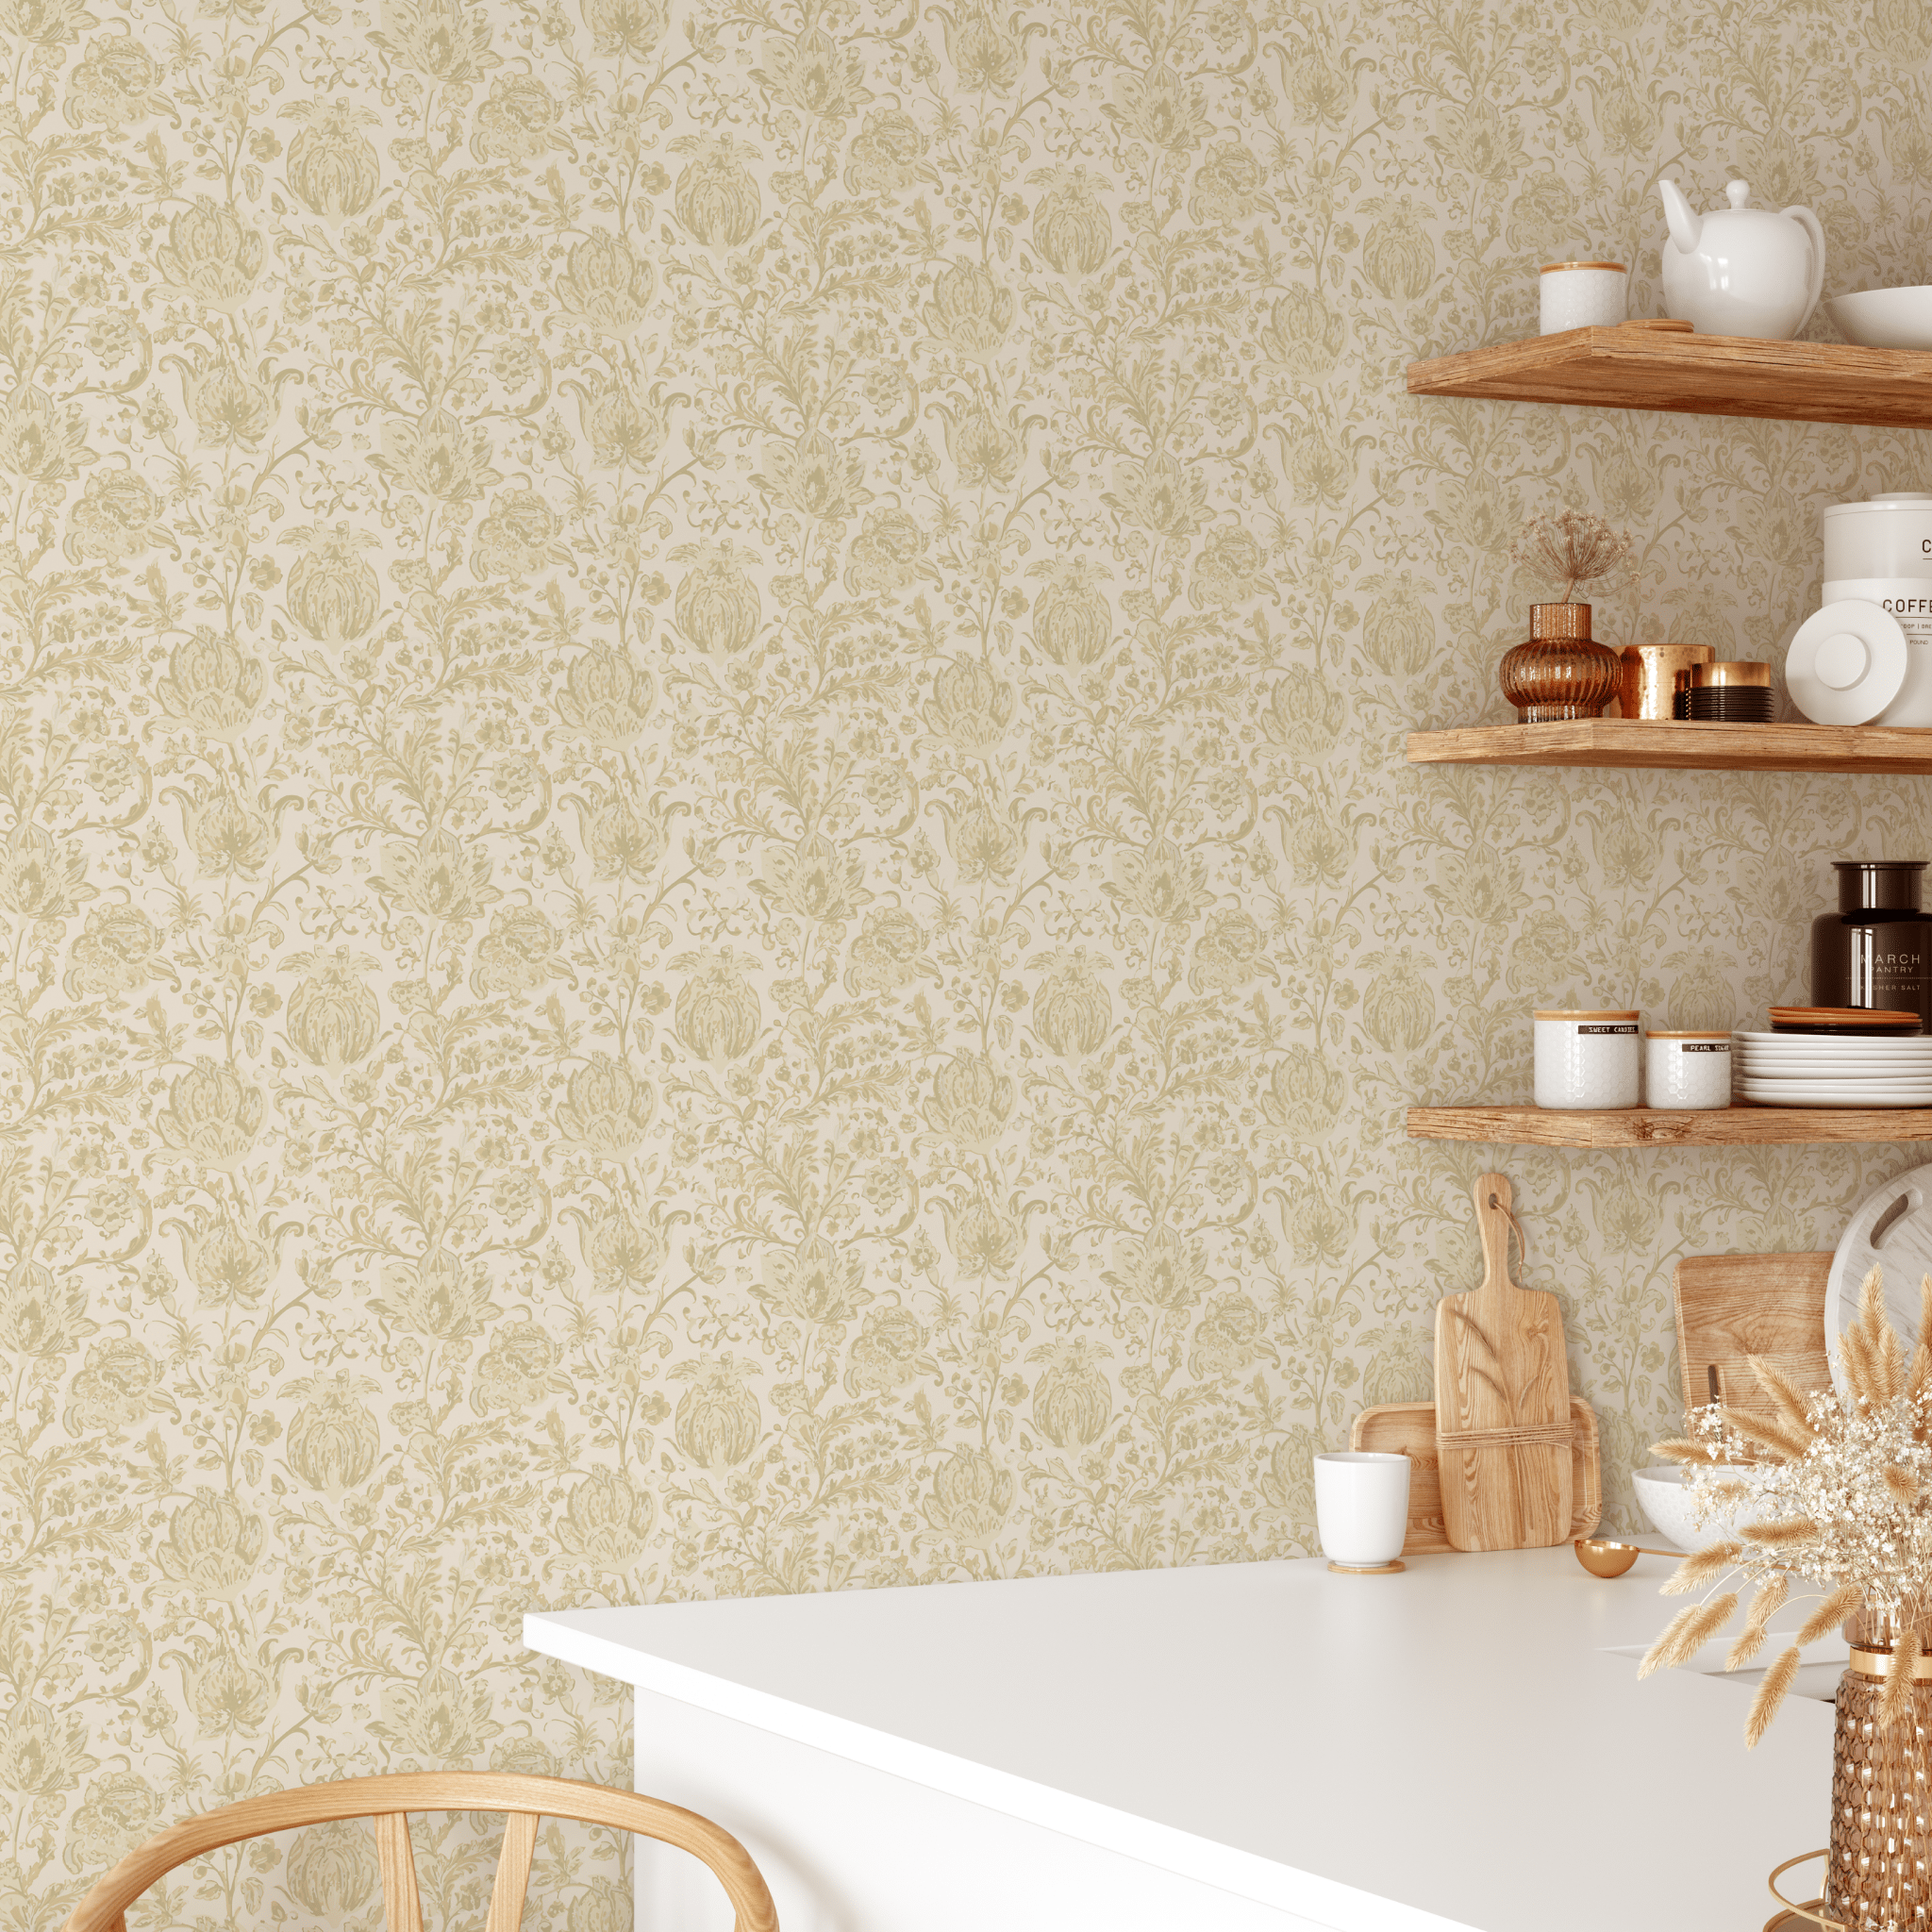 Serene kitchen decorated with beige brocade peel and stick wallpaper, providing a timeless, ornate backdrop.